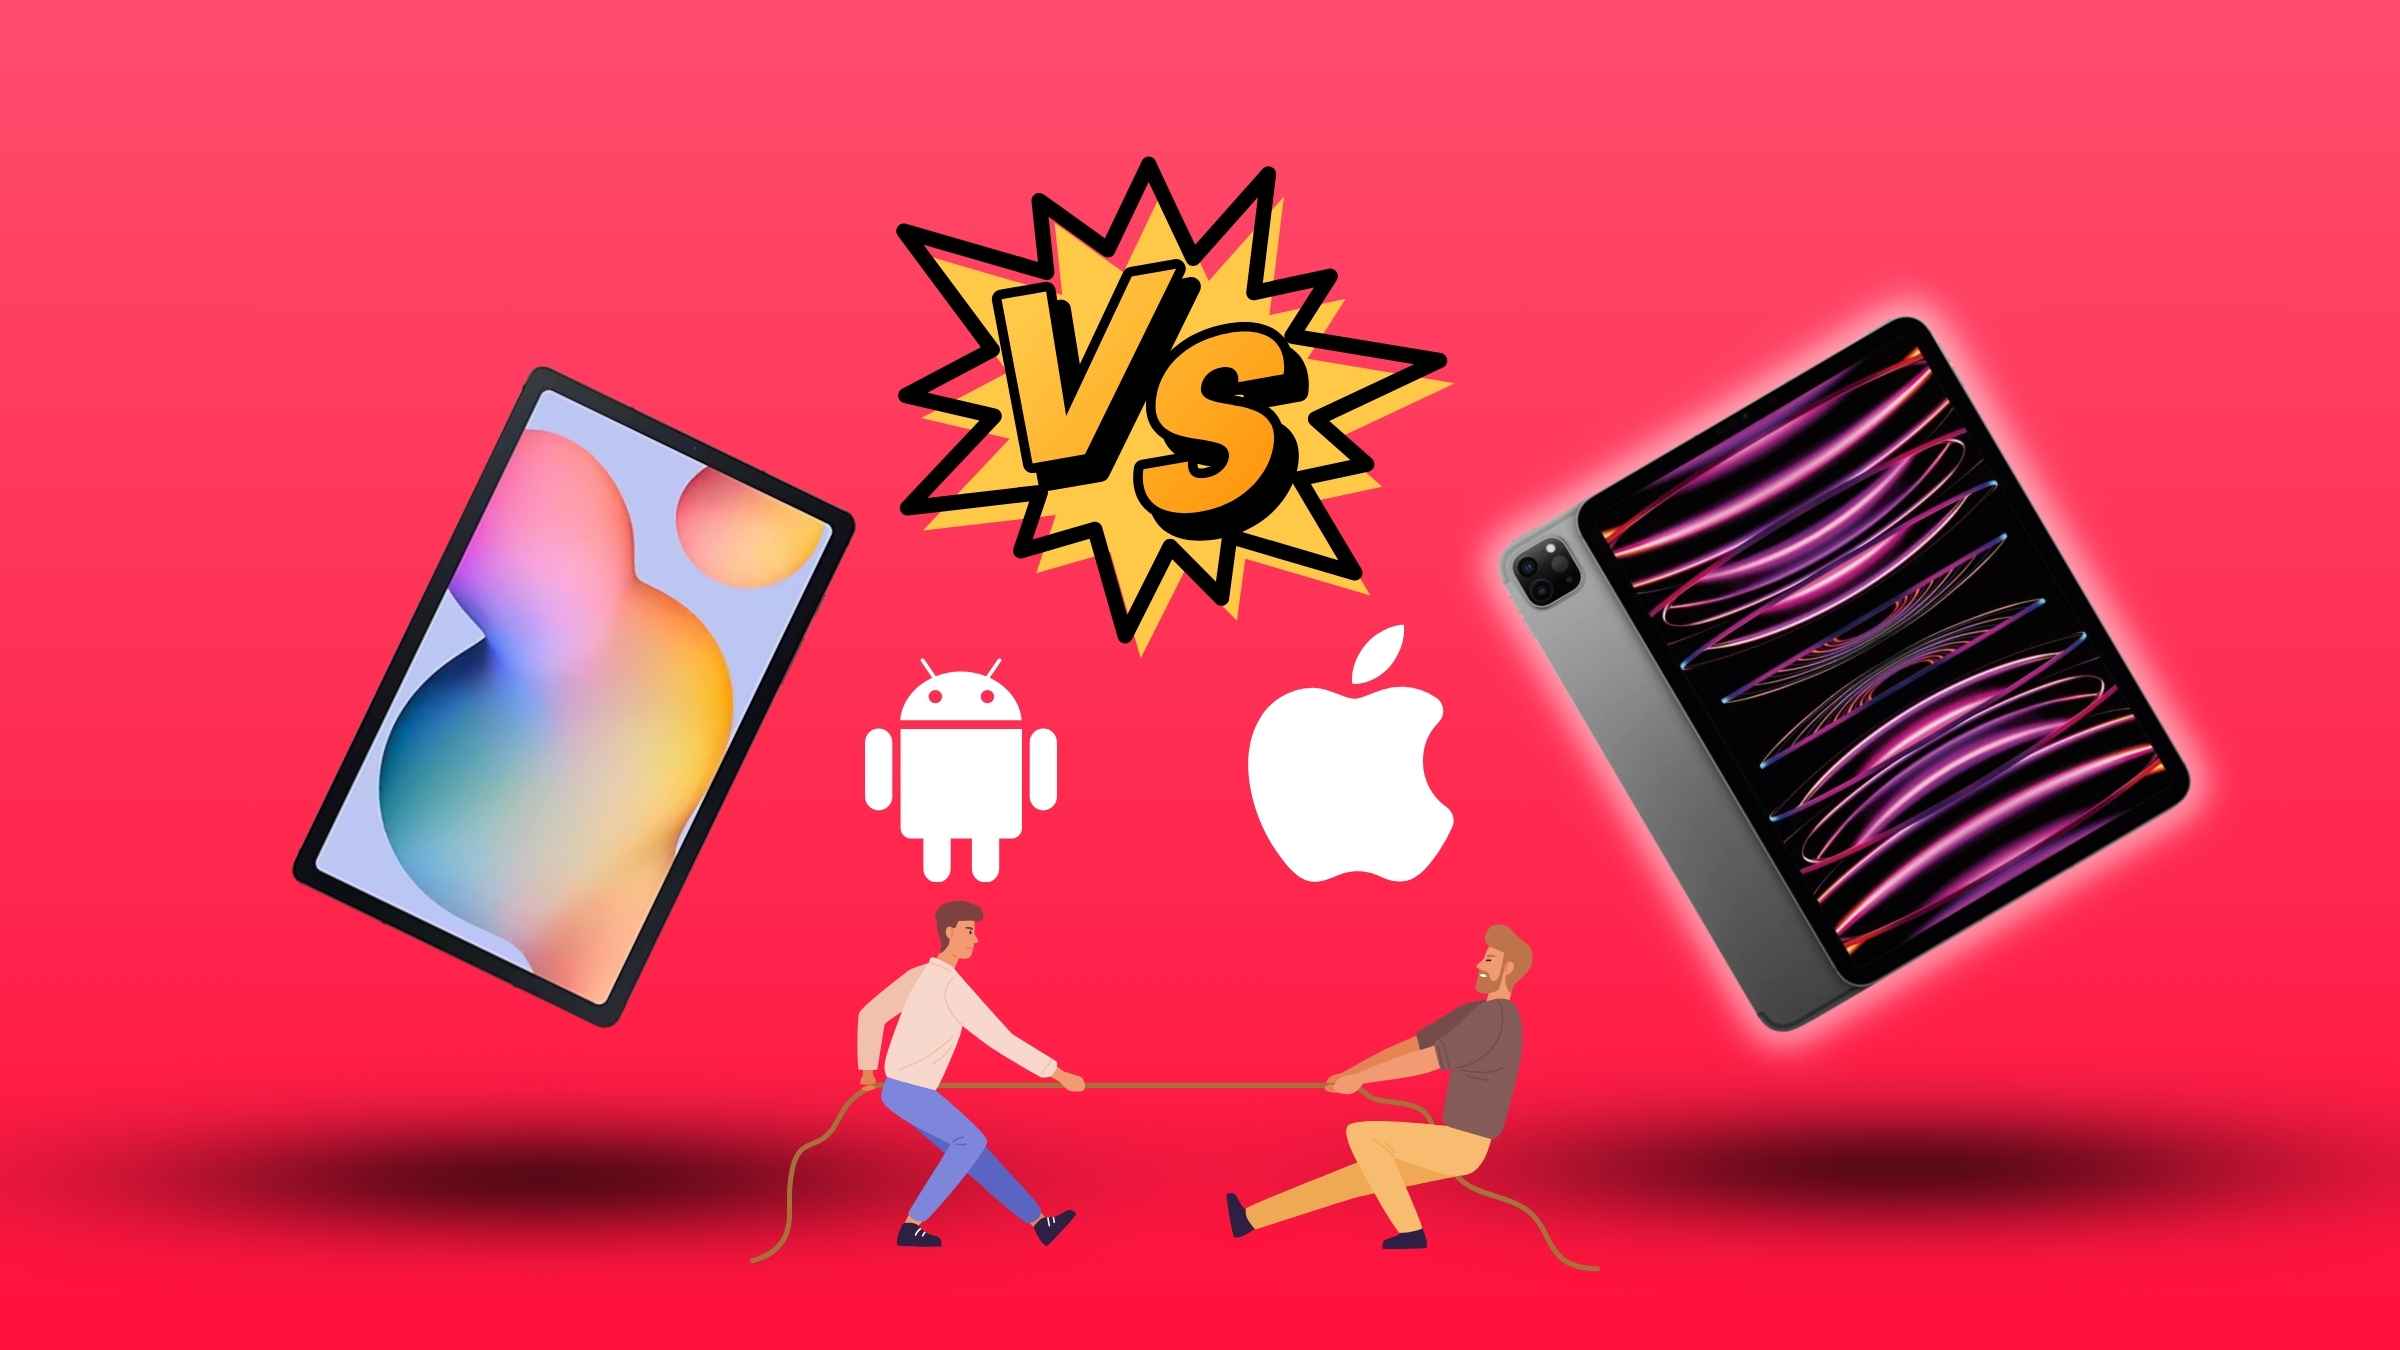 ipads vs android tablets what are the differences. which one is better for you